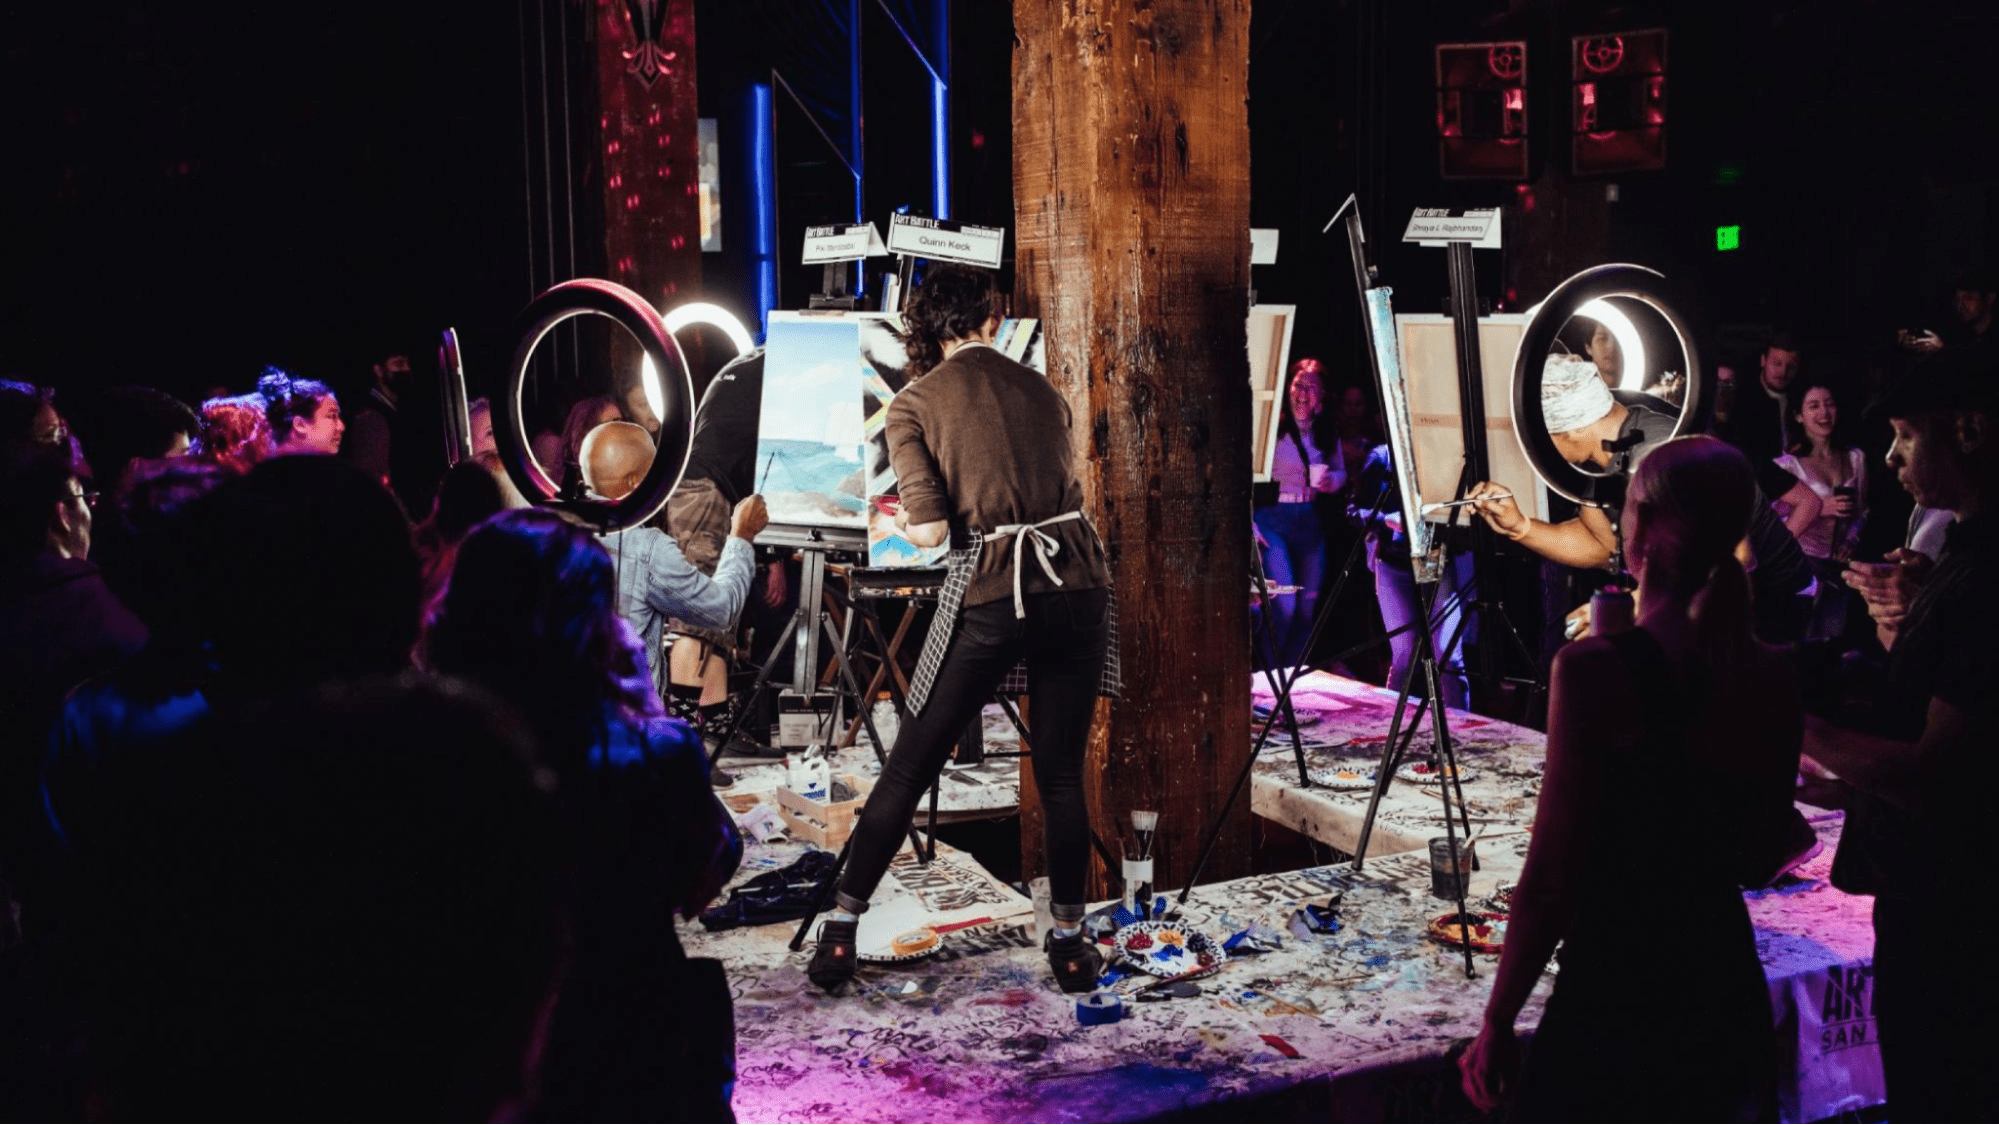 Artists painting in a competition